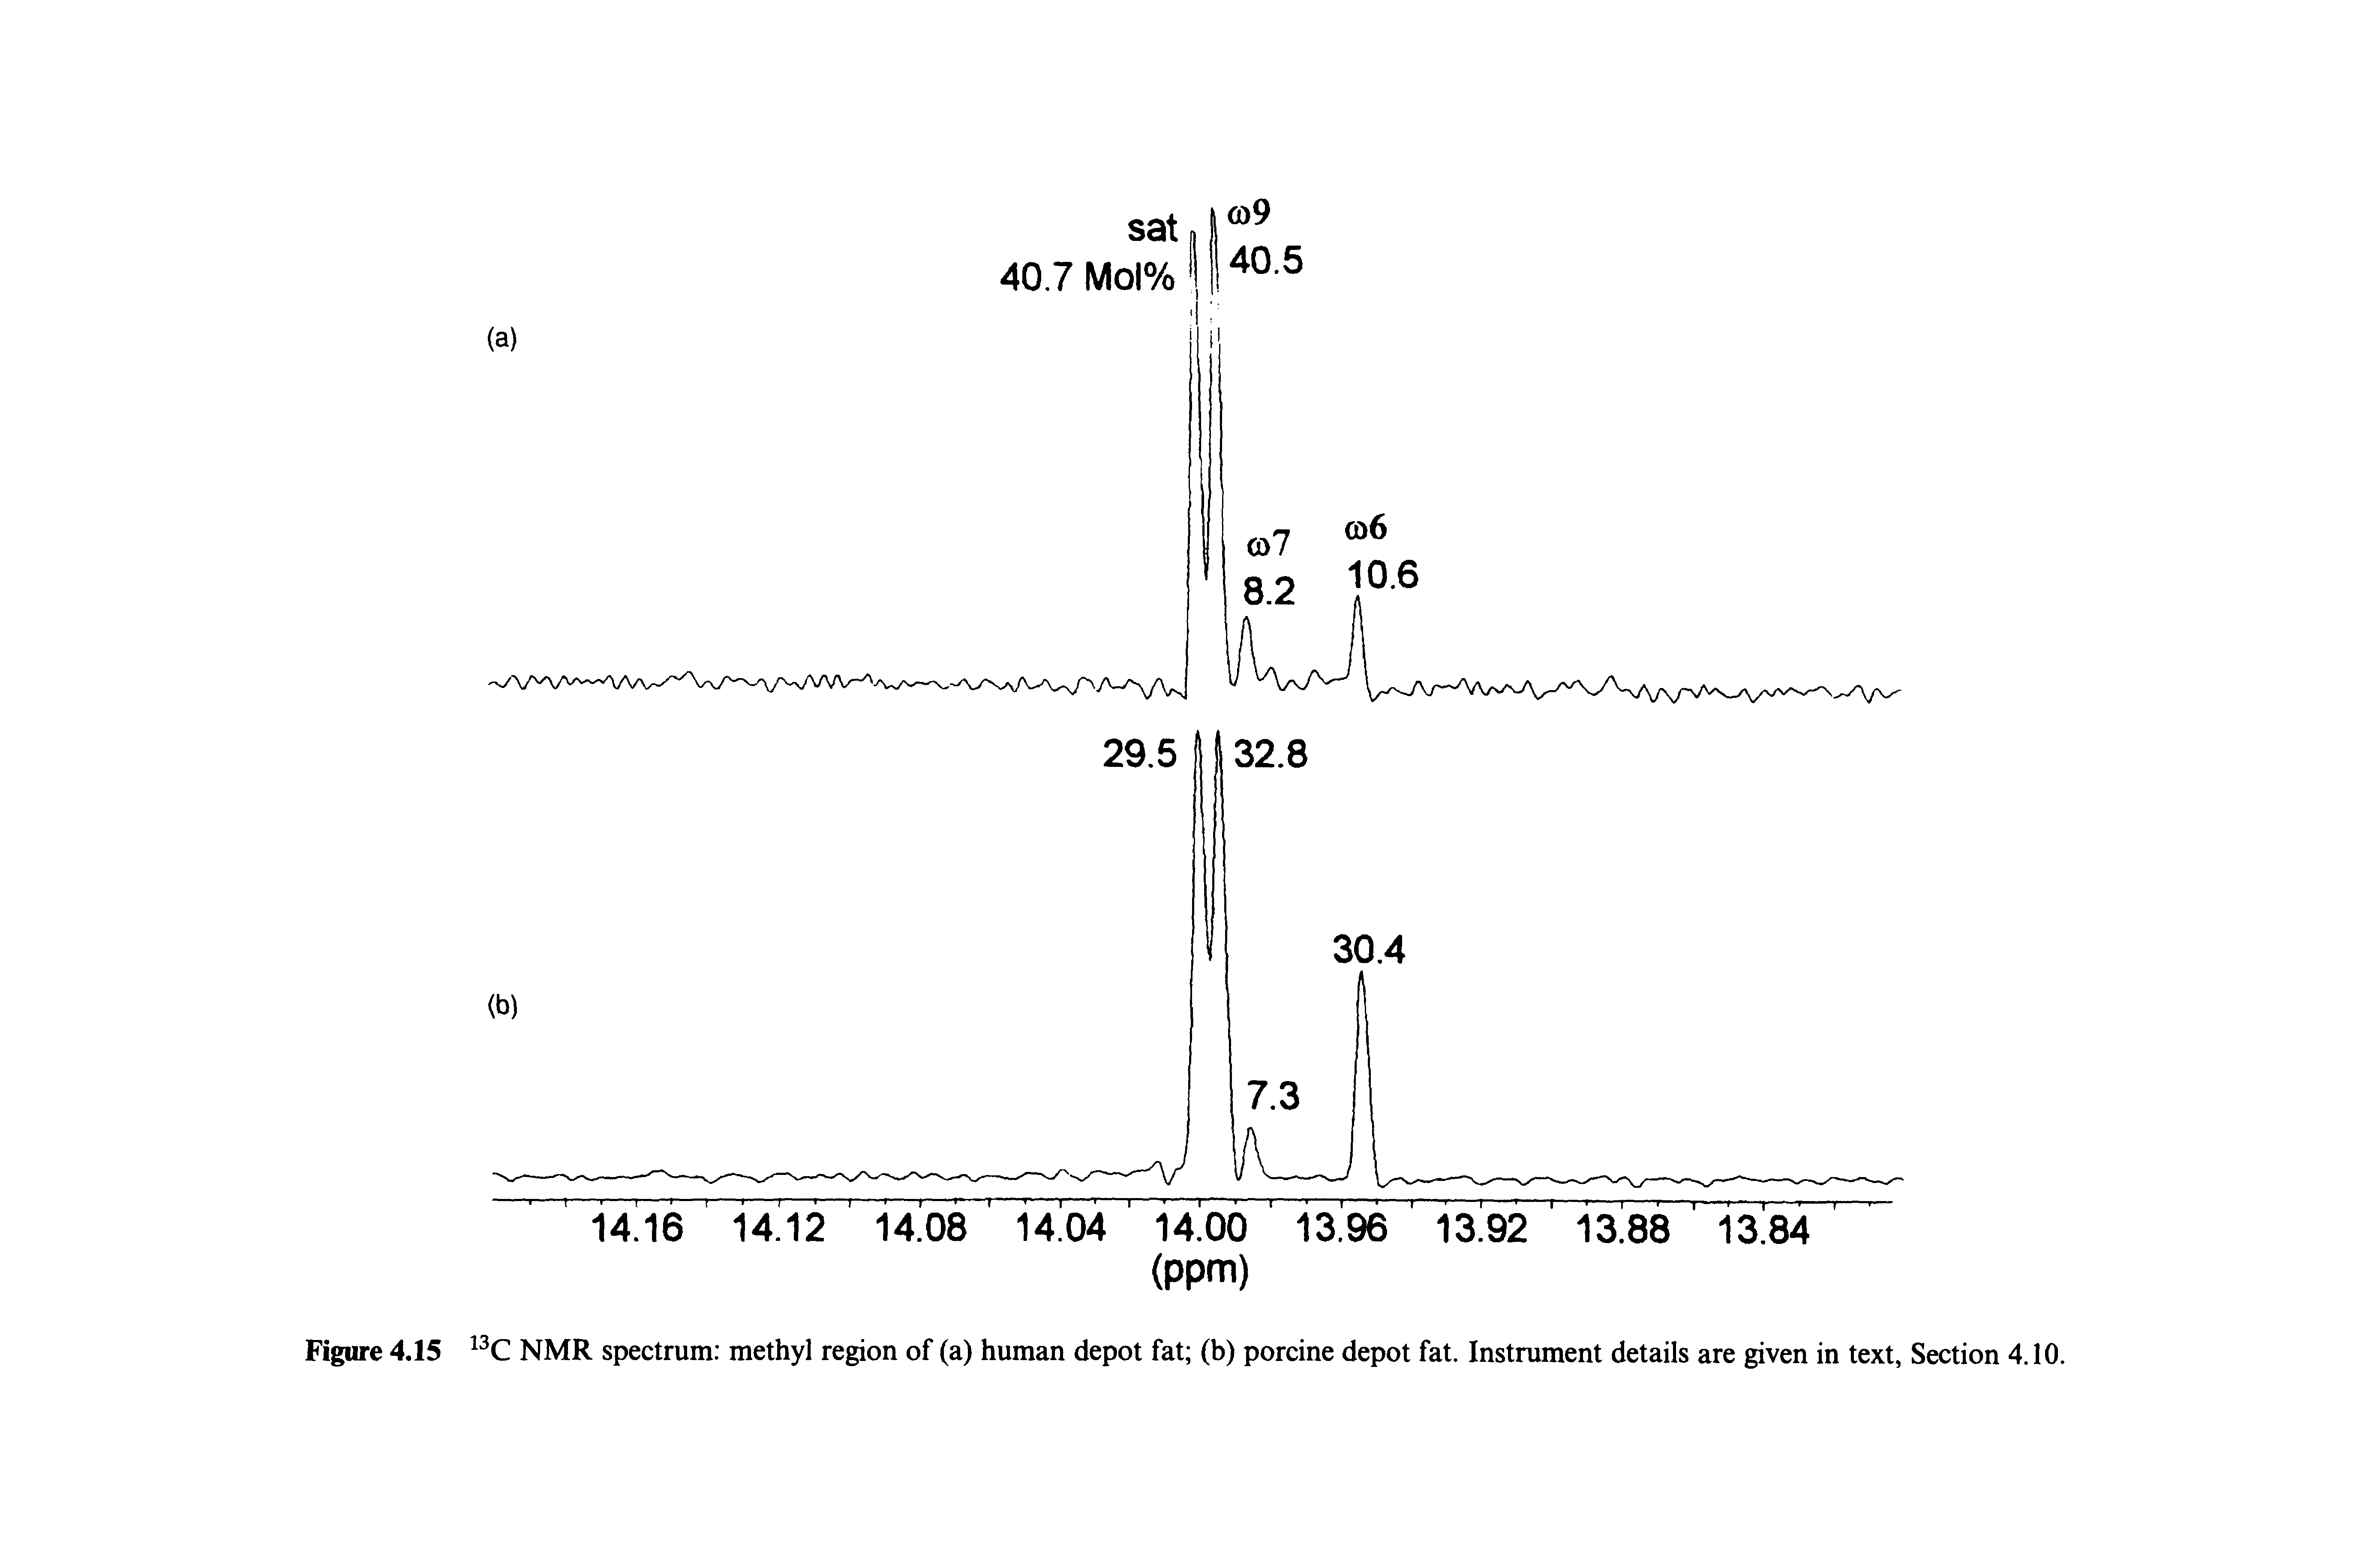 Figure 4.15 NMR spectrum methyl region of (a) human depot fat (b) porcine depot fat. Instrument details are given in text, Section 4.10.